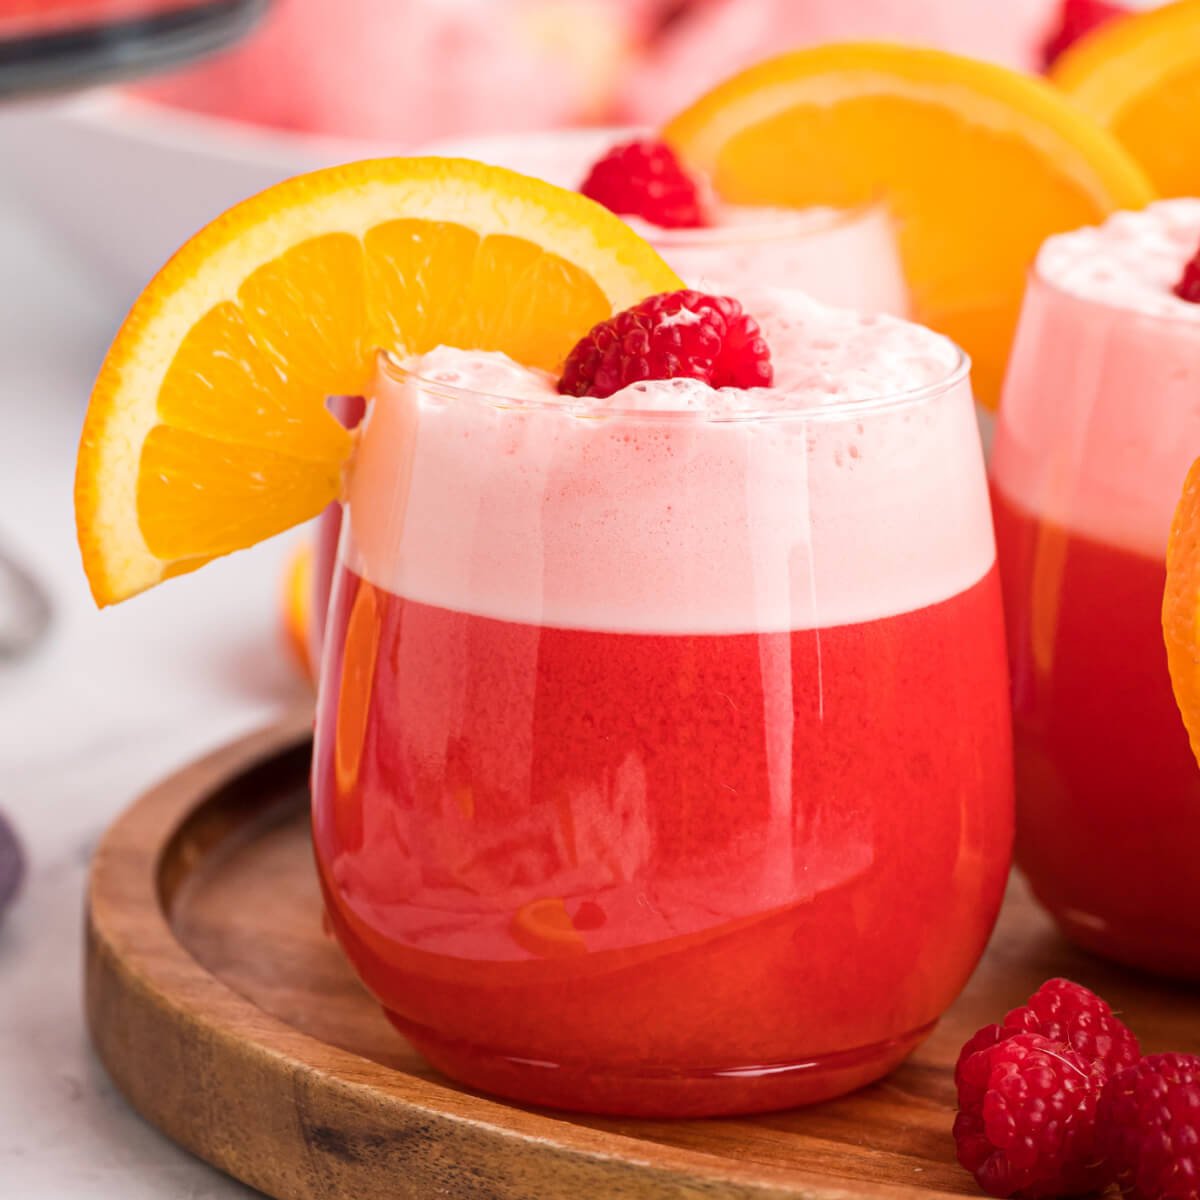 Savor Home: THE BEST PARTY PUNCH EVER.